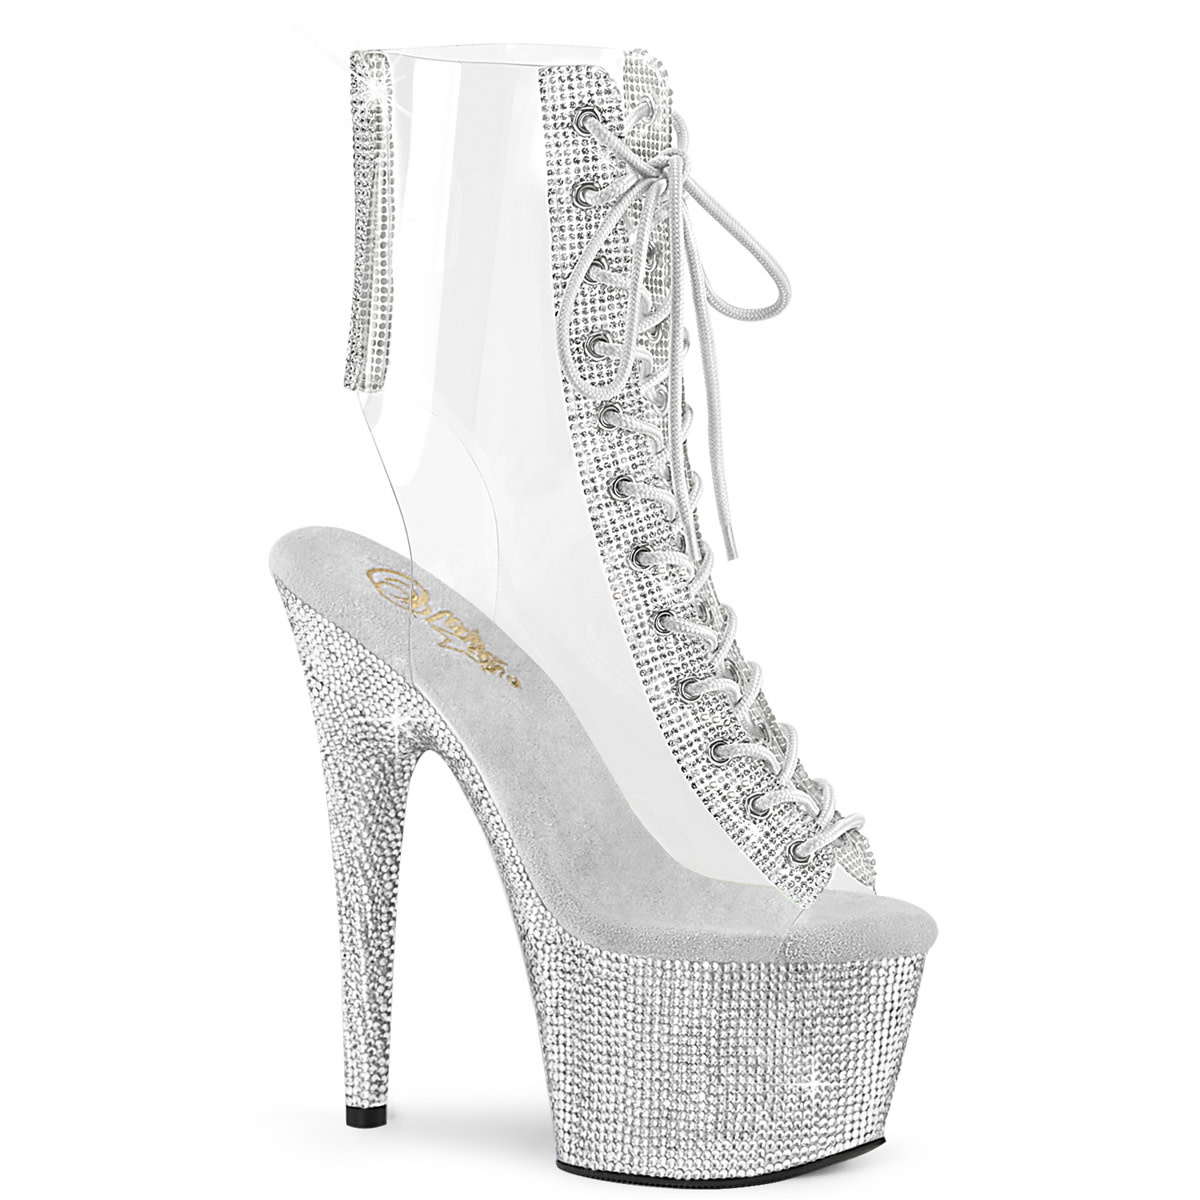 Bling Shoes, Sparkly Shoes, Stripper Shoes – BootyCocktails